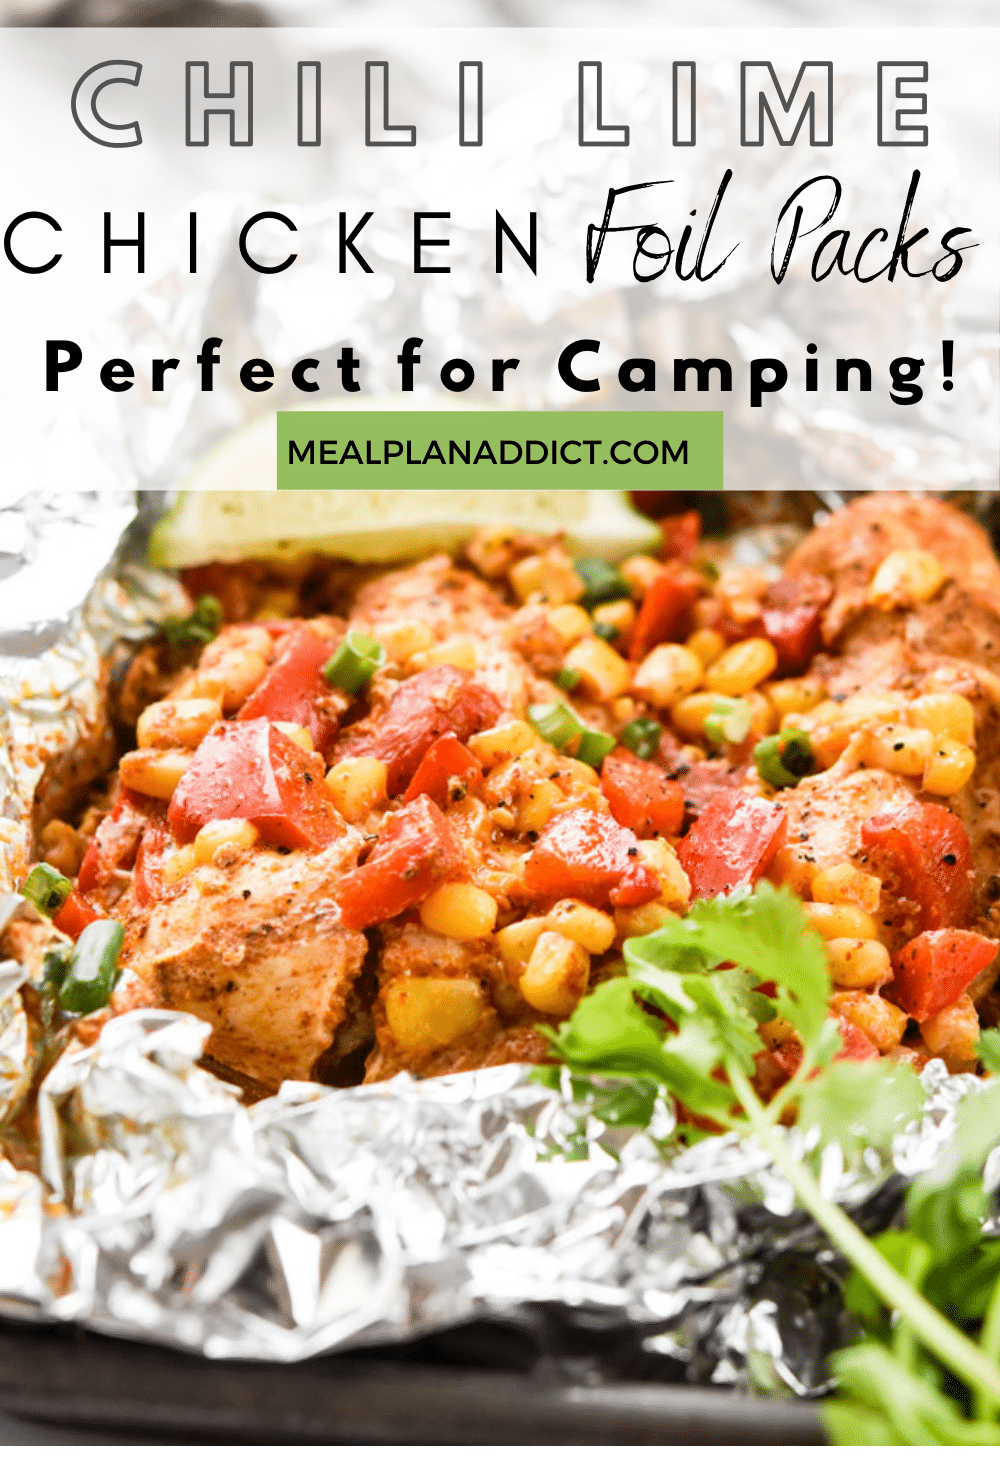 Chili Lime Chicken Foil Packs - Perfect for Camping! | Meal Plan Addict